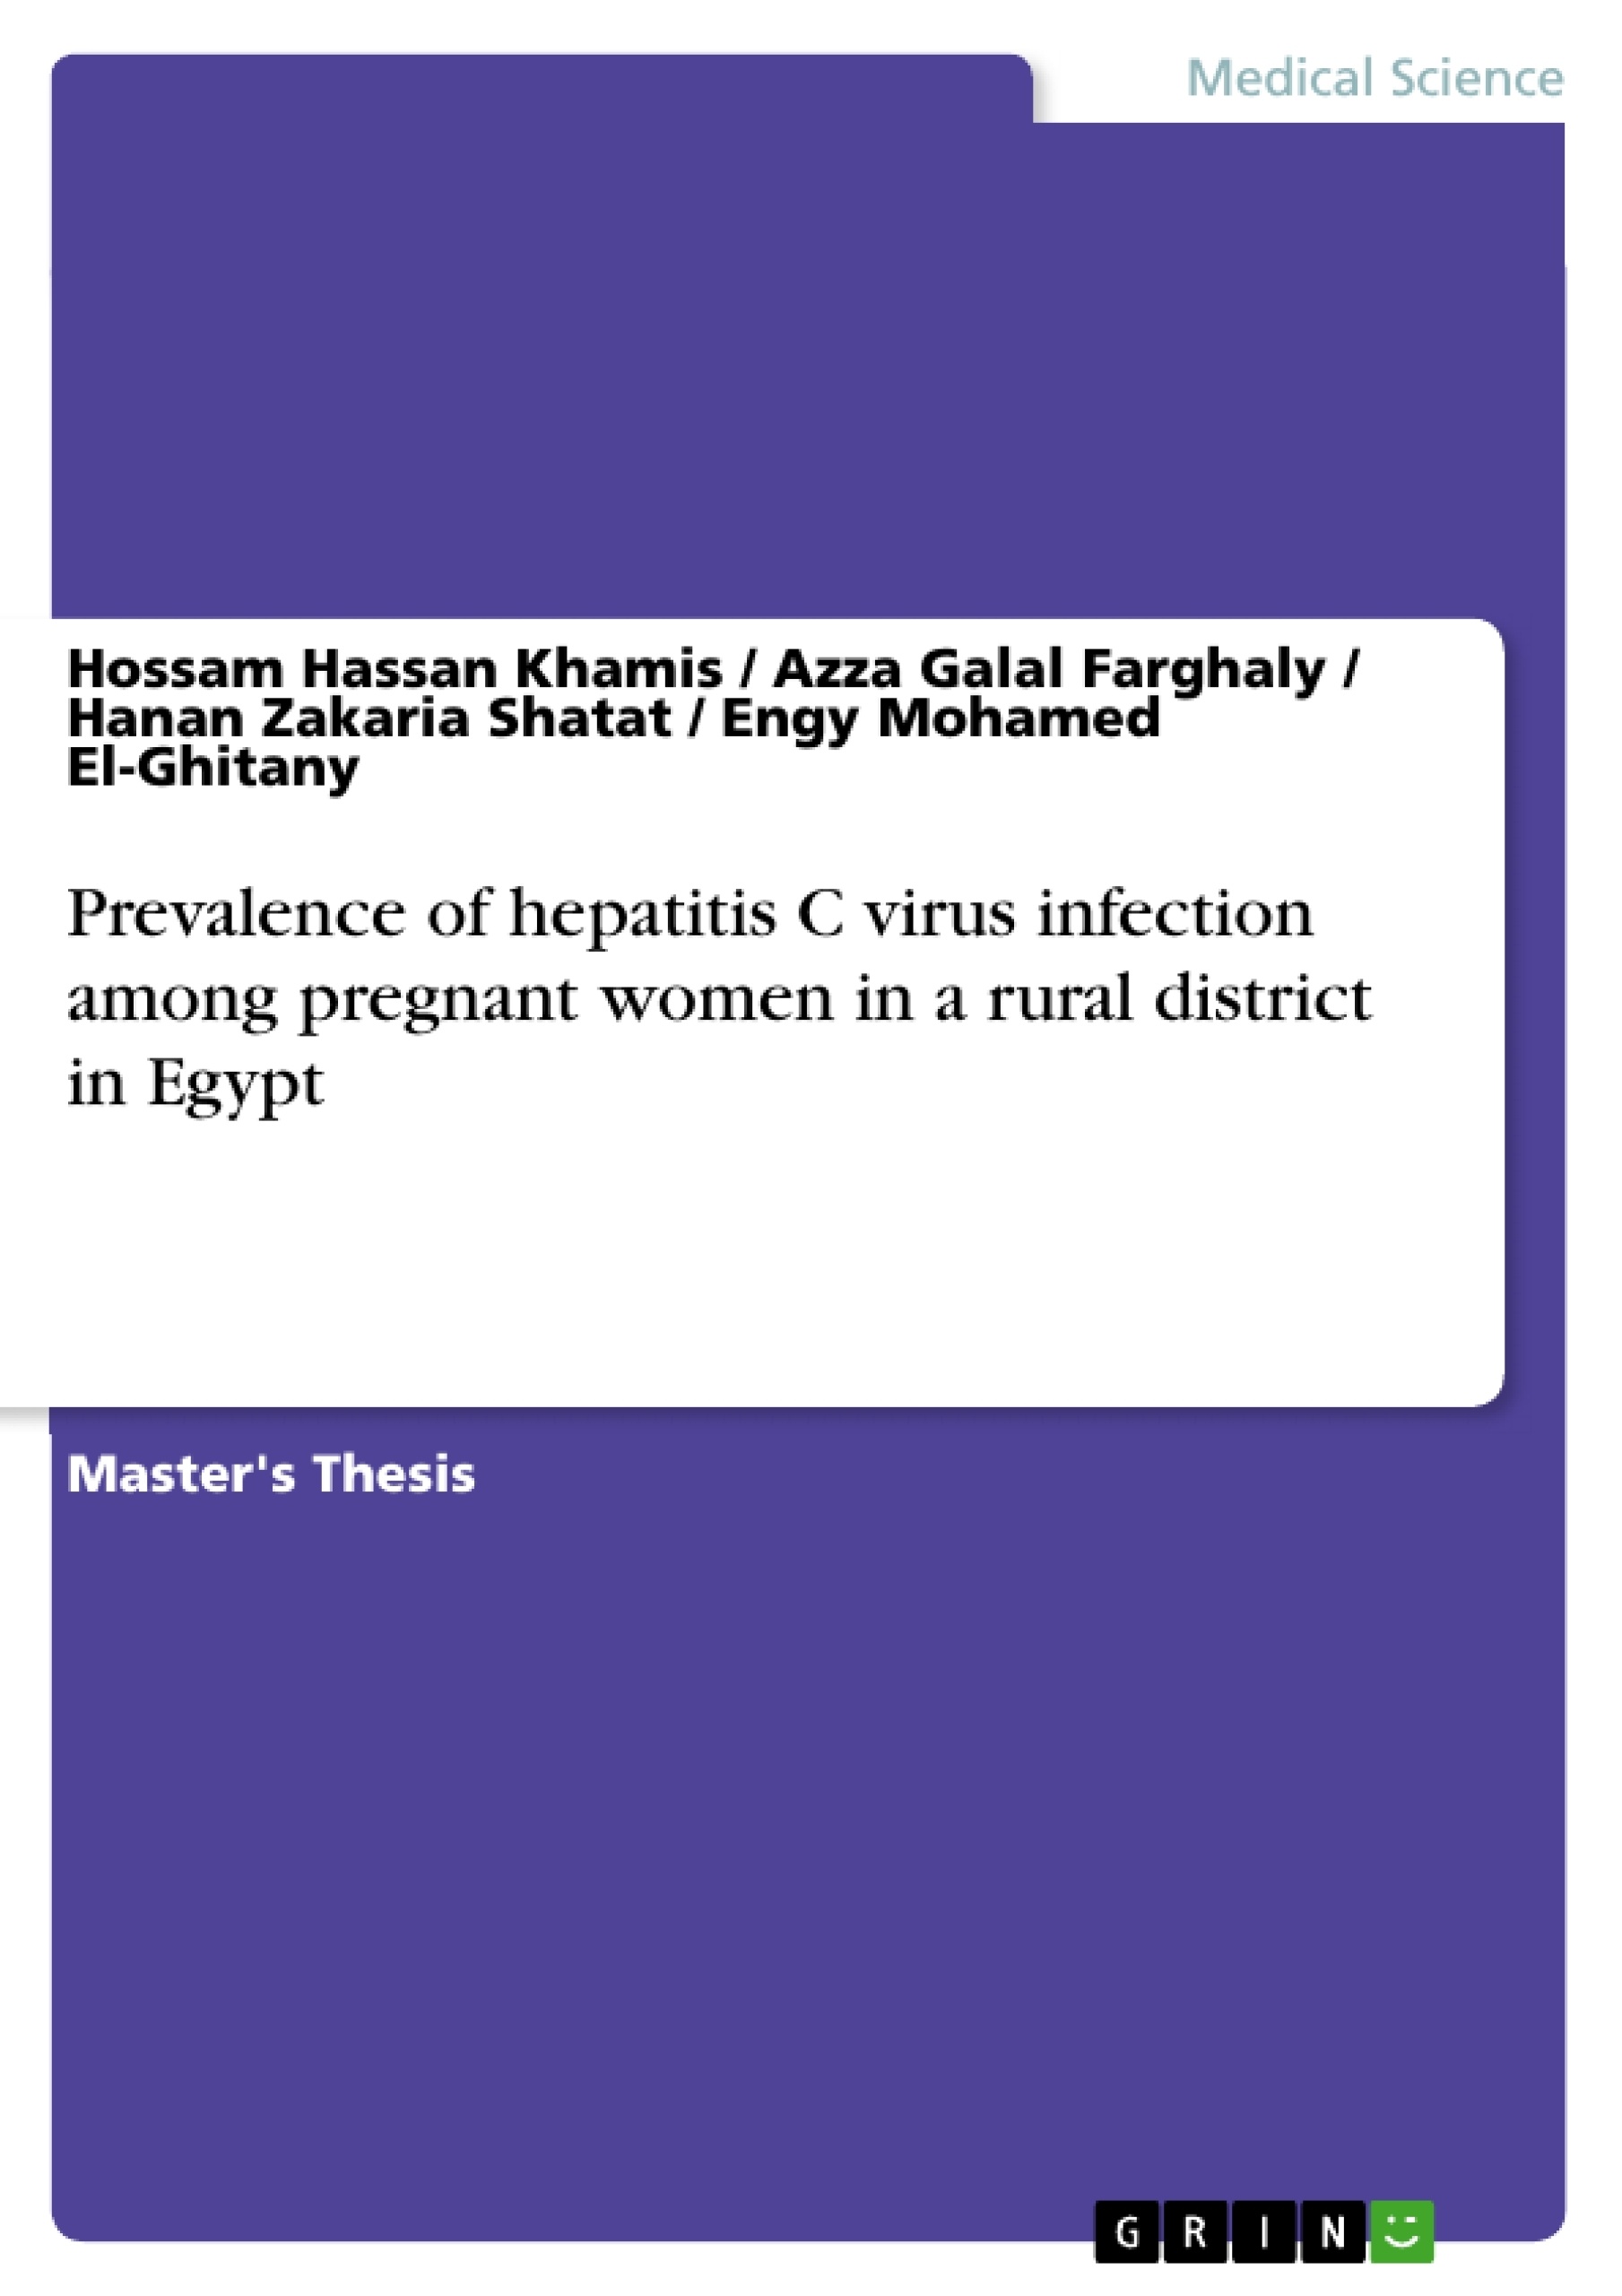 Title: Prevalence of hepatitis C virus infection among pregnant women in a  rural district in Egypt